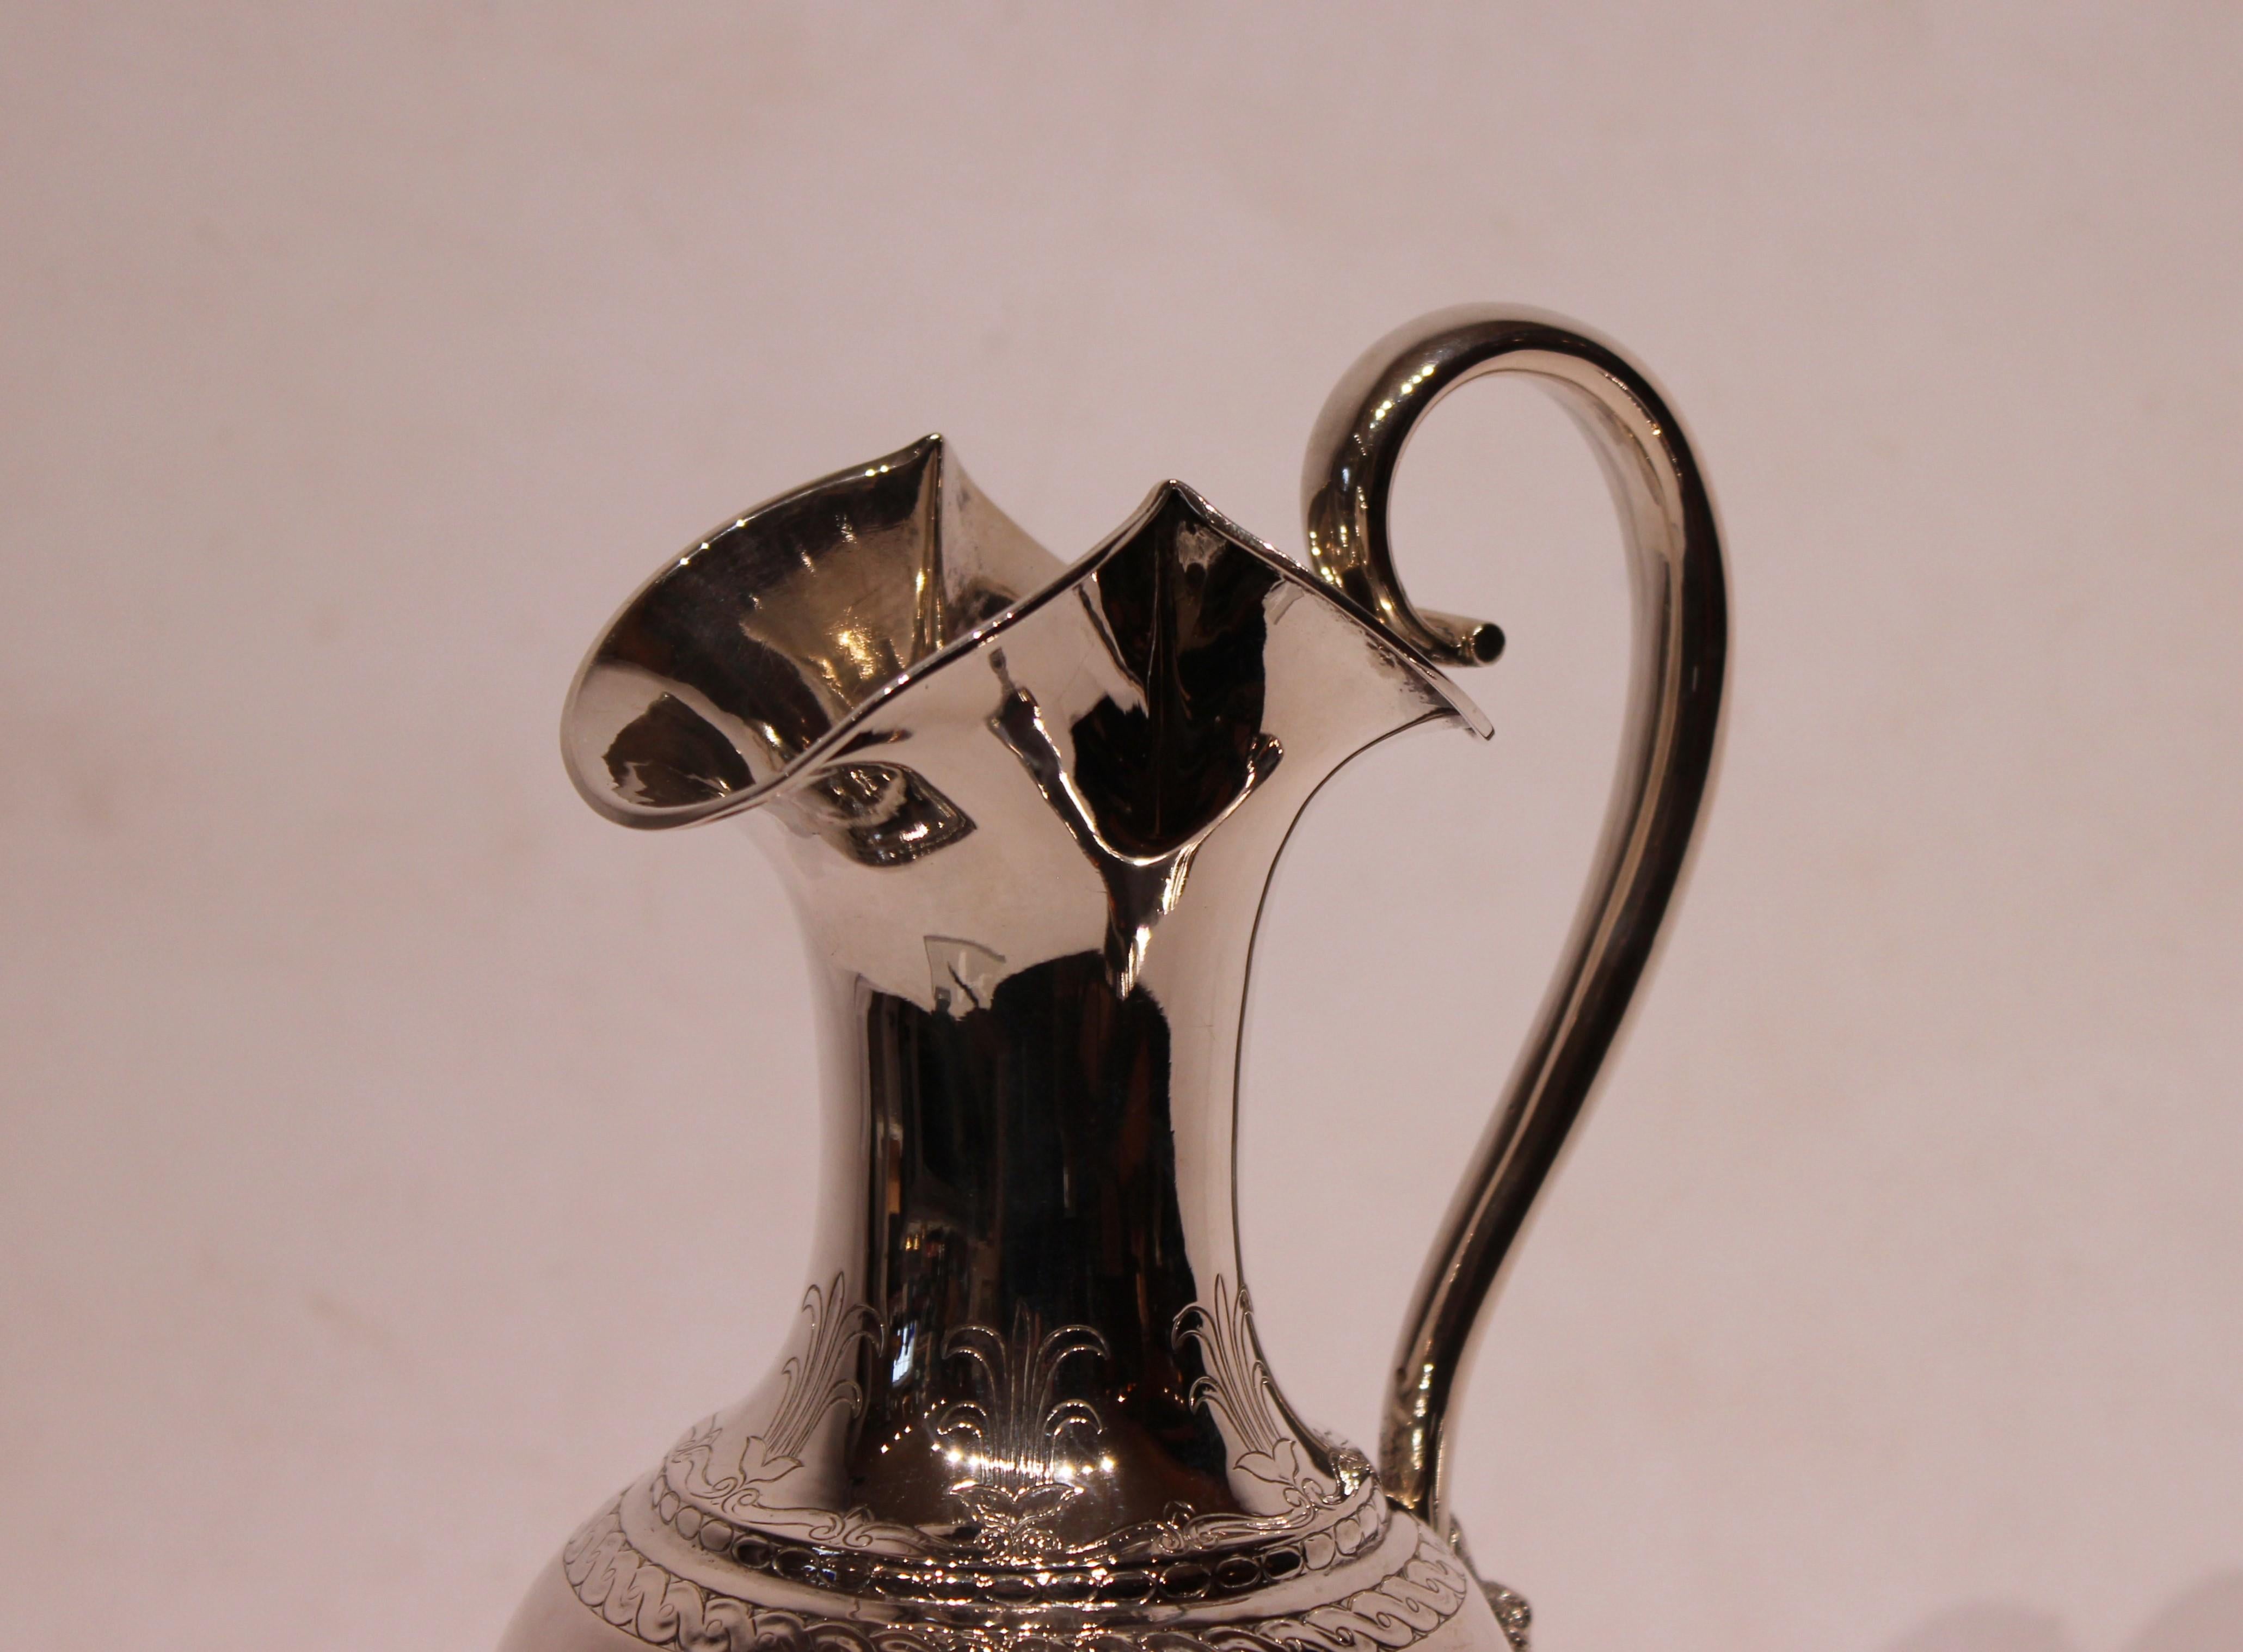 Water jug beautifully decorated of hallmarked silver. The jug is in great vintage condition.